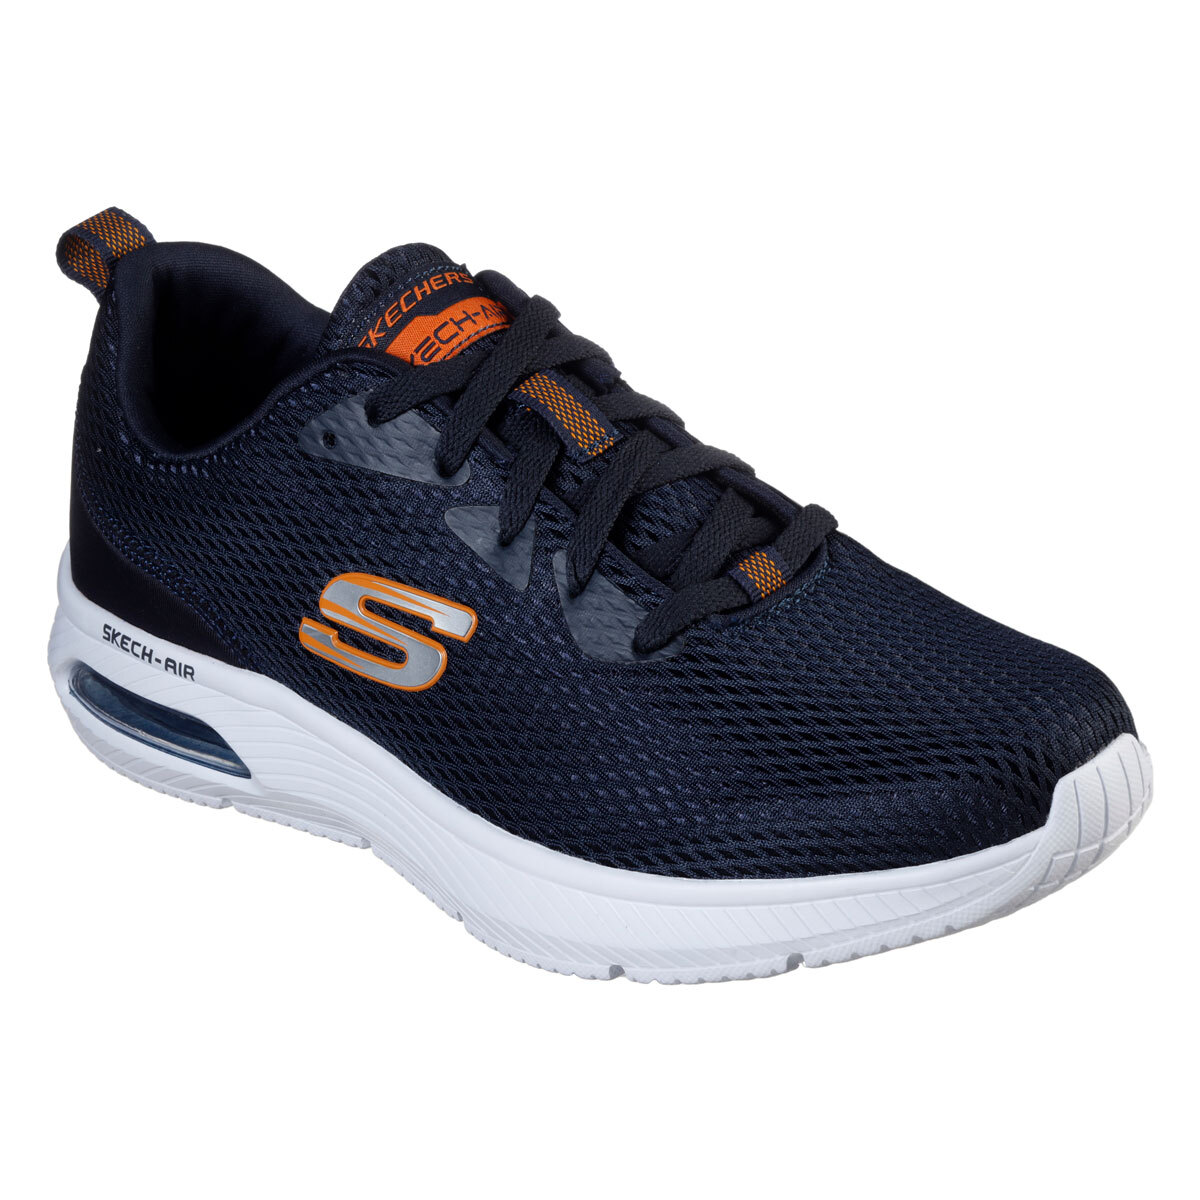 Skechers Dyna Air Men's Shoes in 2 Colours and 6 Sizes